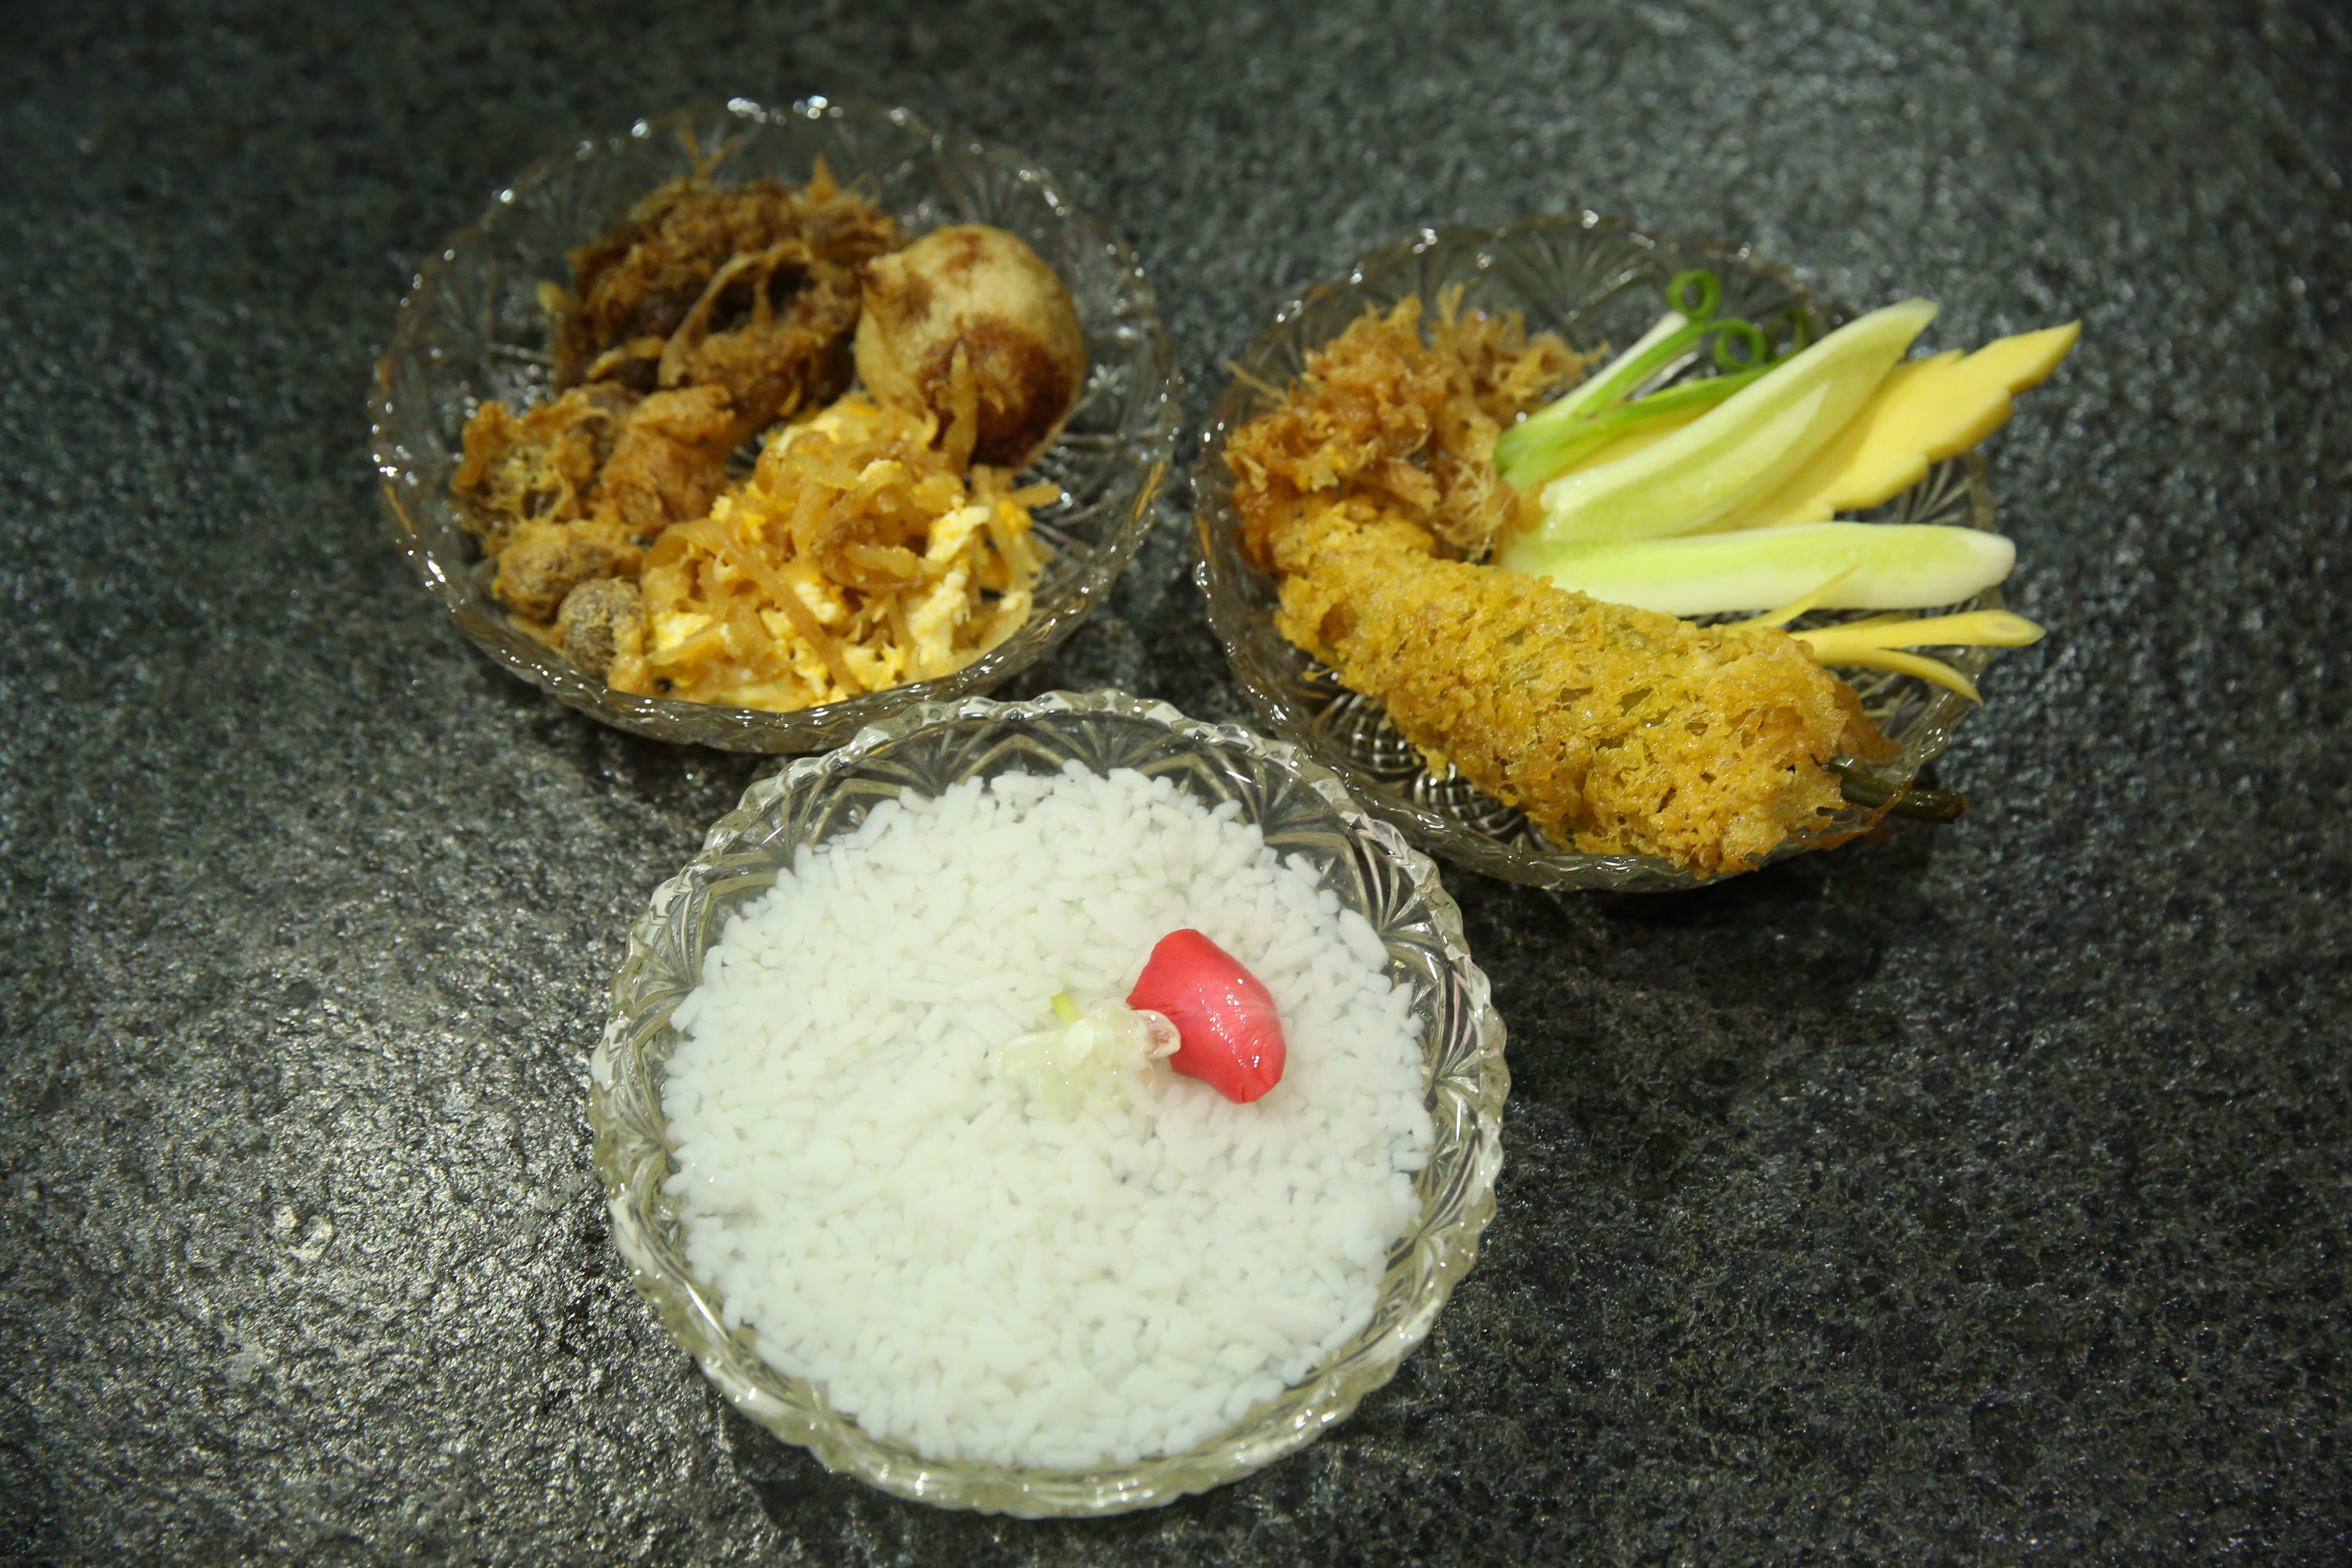  <em>Khao chae,</em> candle-scented rice in jasmine-scented water, is associated with Songkran or Thai New Year.